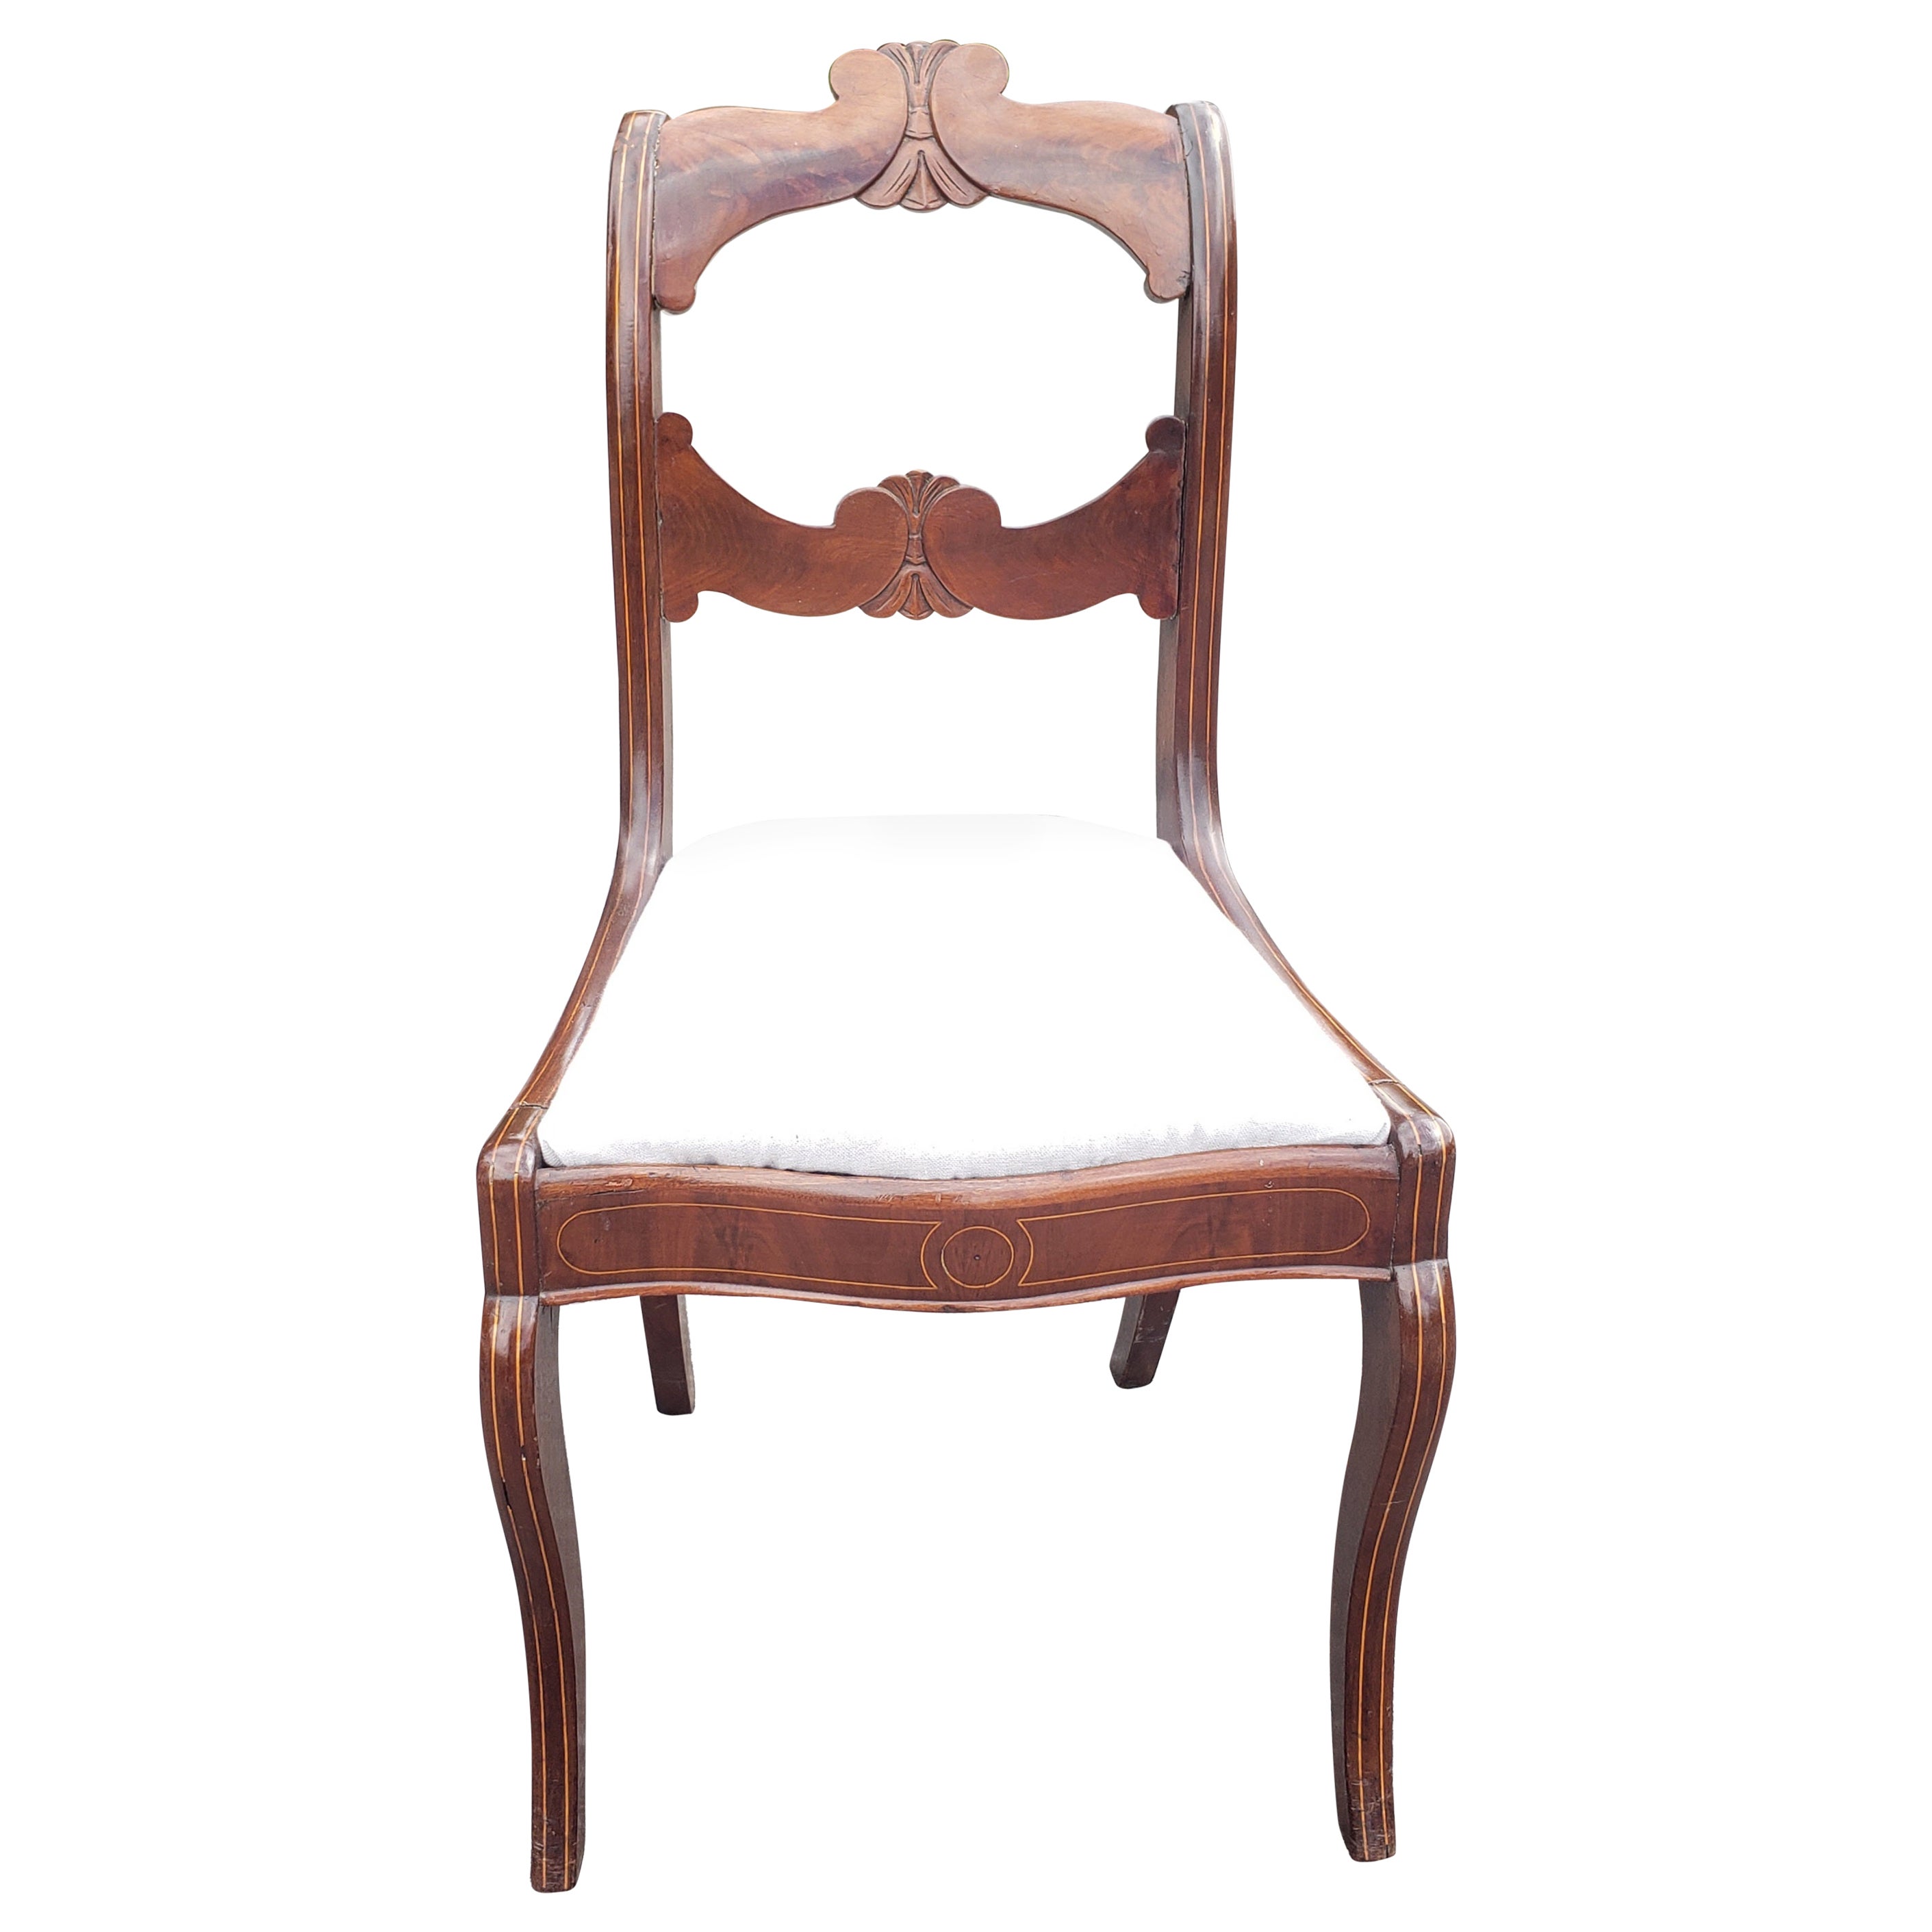 19th C. Flame Mahogany and Satinwood Inlaid with Upholstered Seat Side Chair For Sale